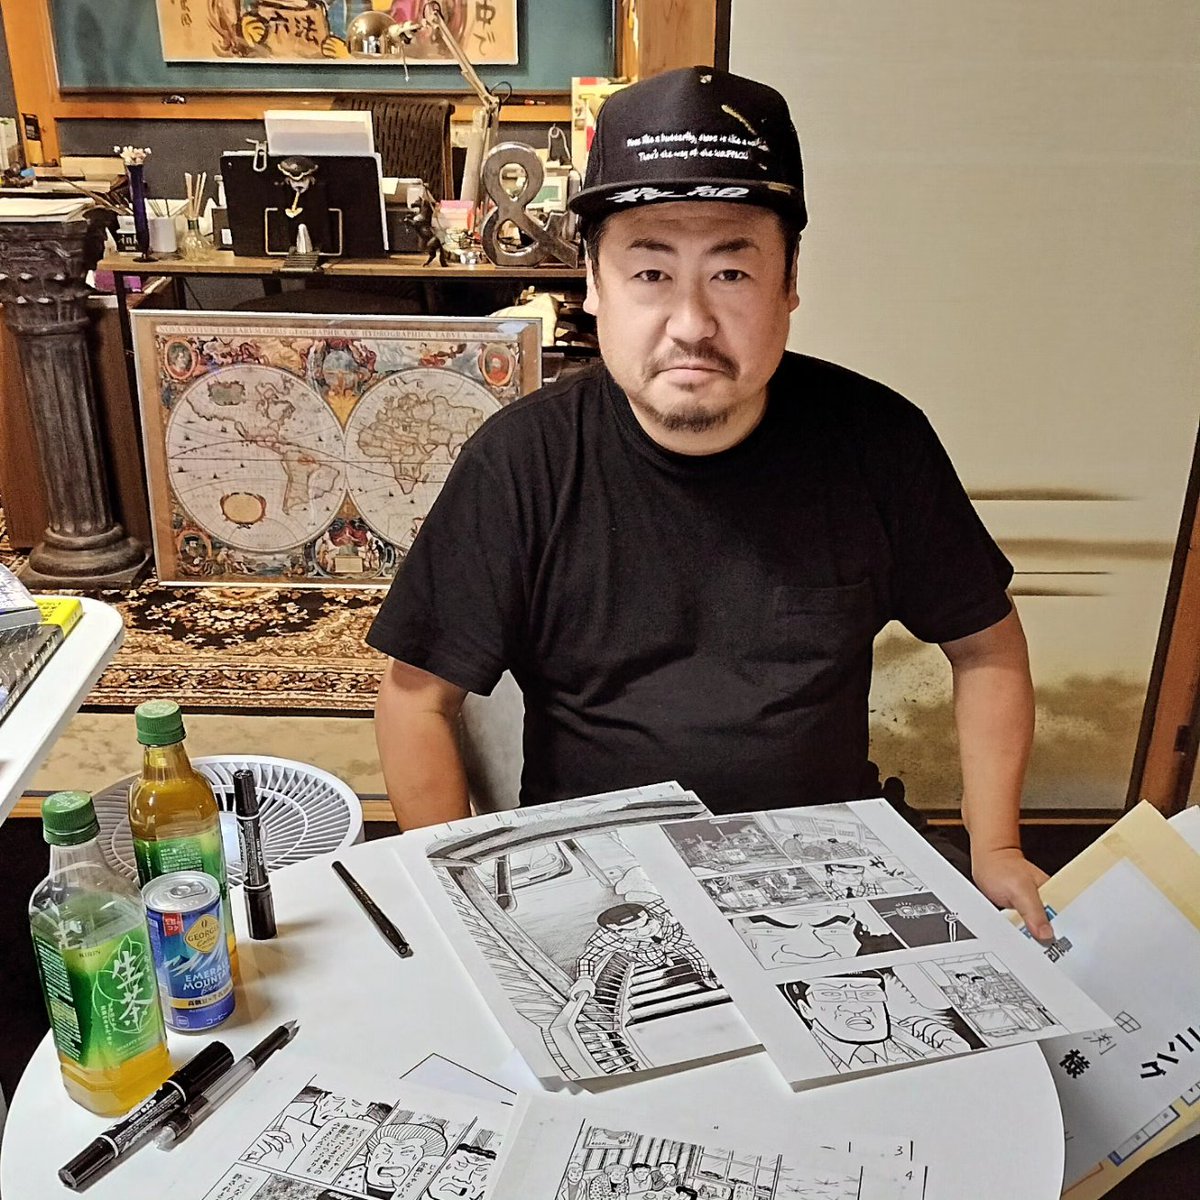 Today I met @kochi_900 , mangaka of Kabachitare and Ganbo. He's one of my favorites ever so I was honored to meet him at his studio today. We chat about manga, crazy deadlines, working for Morning and he even drew me and Yamano, from Matagi Gunner. Thank you Kochi sensei! 🙏🏻